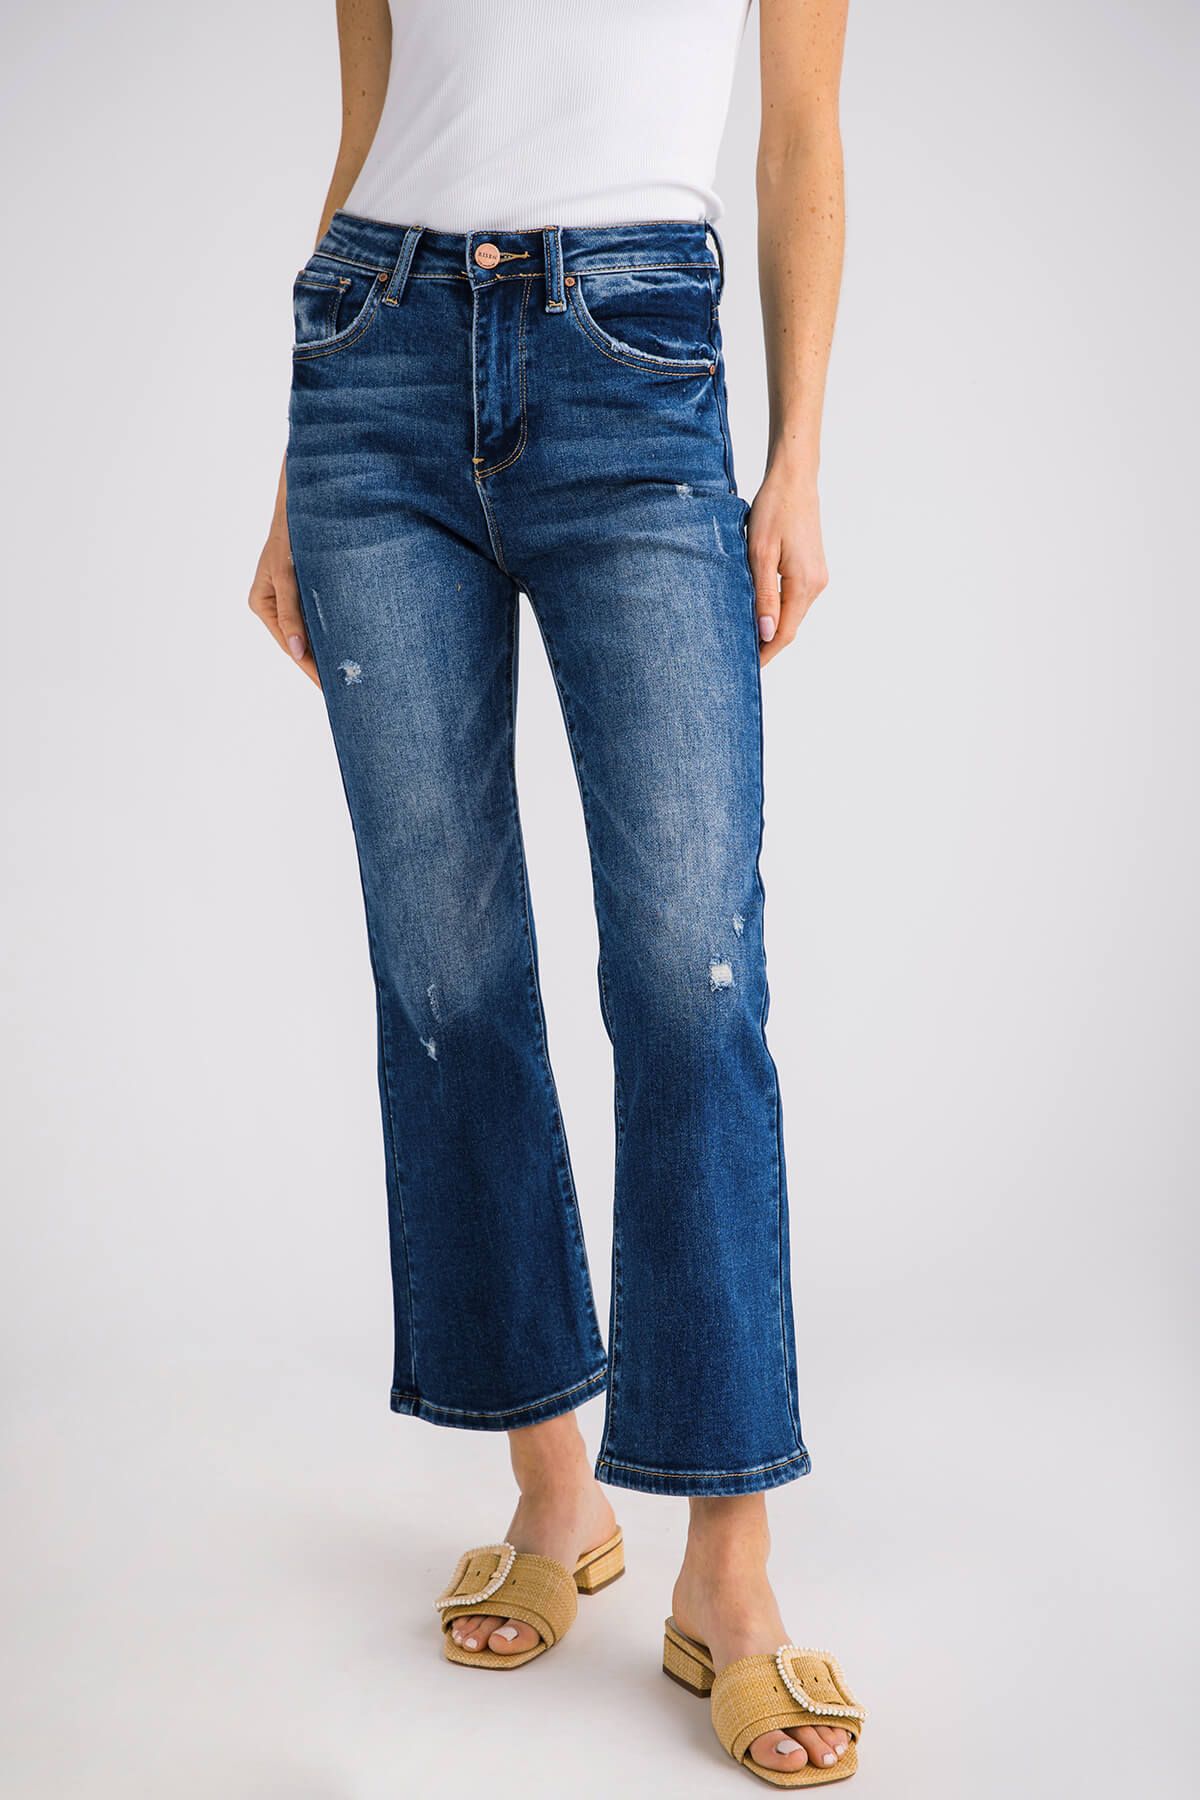 Risen Emily High Rise Ankle Bootcut Jeans | Social Threads